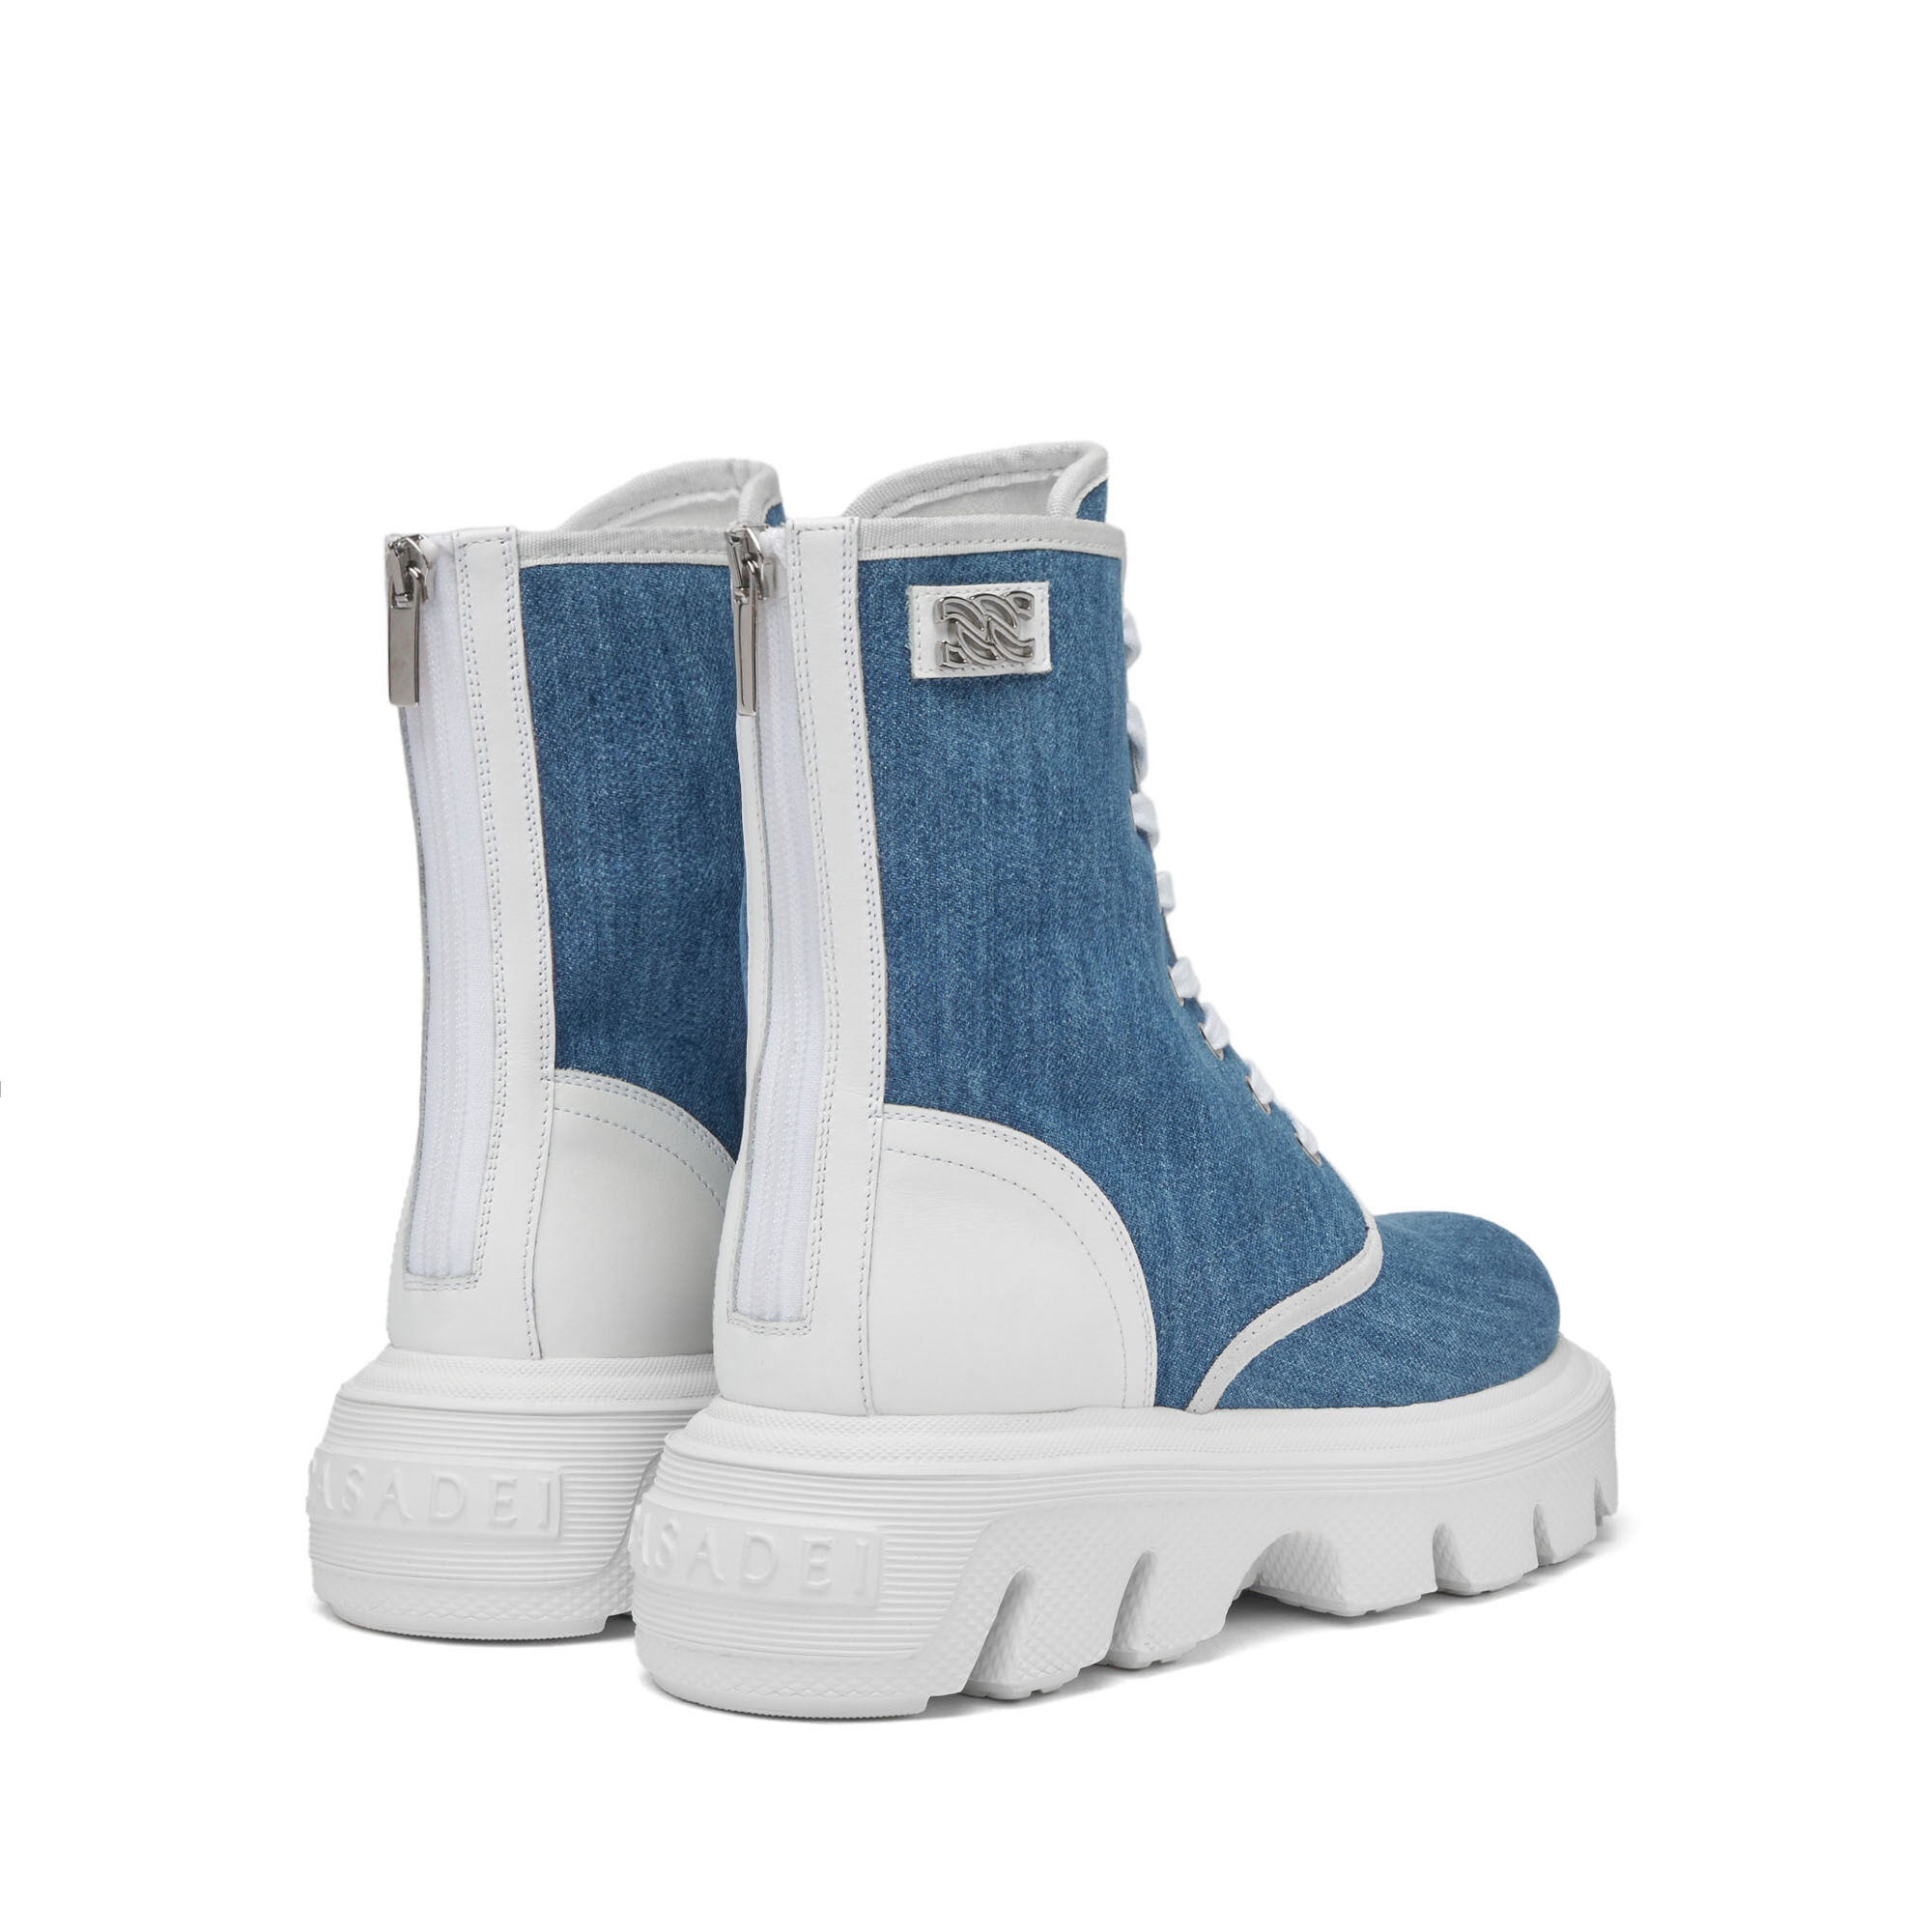 Generation C Denim Biker Boots XXL Sole in Jeans and White for 